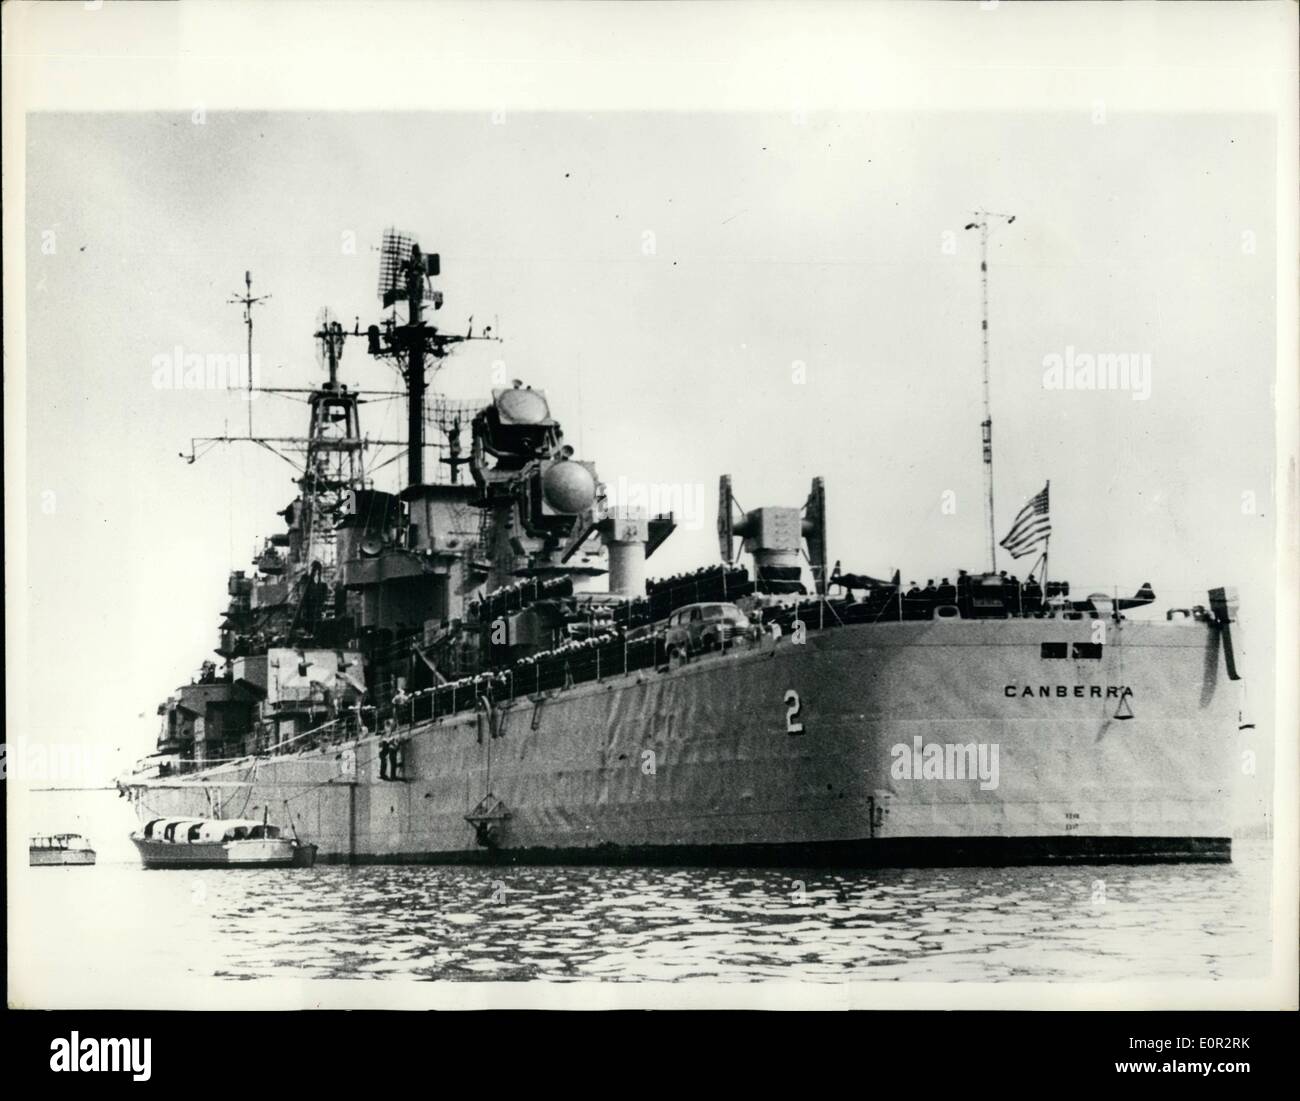 Oct. 10, 1957 - American guided missile warship visits Turkey. Photo shows the U.S.S. Canberra - the Guided Missile warship of the United States Elect seen in the Port of Izmir, Turkey during exercises recently. Special interest is centred around the visit in view of the recent threat of the Arab countries. Stock Photo